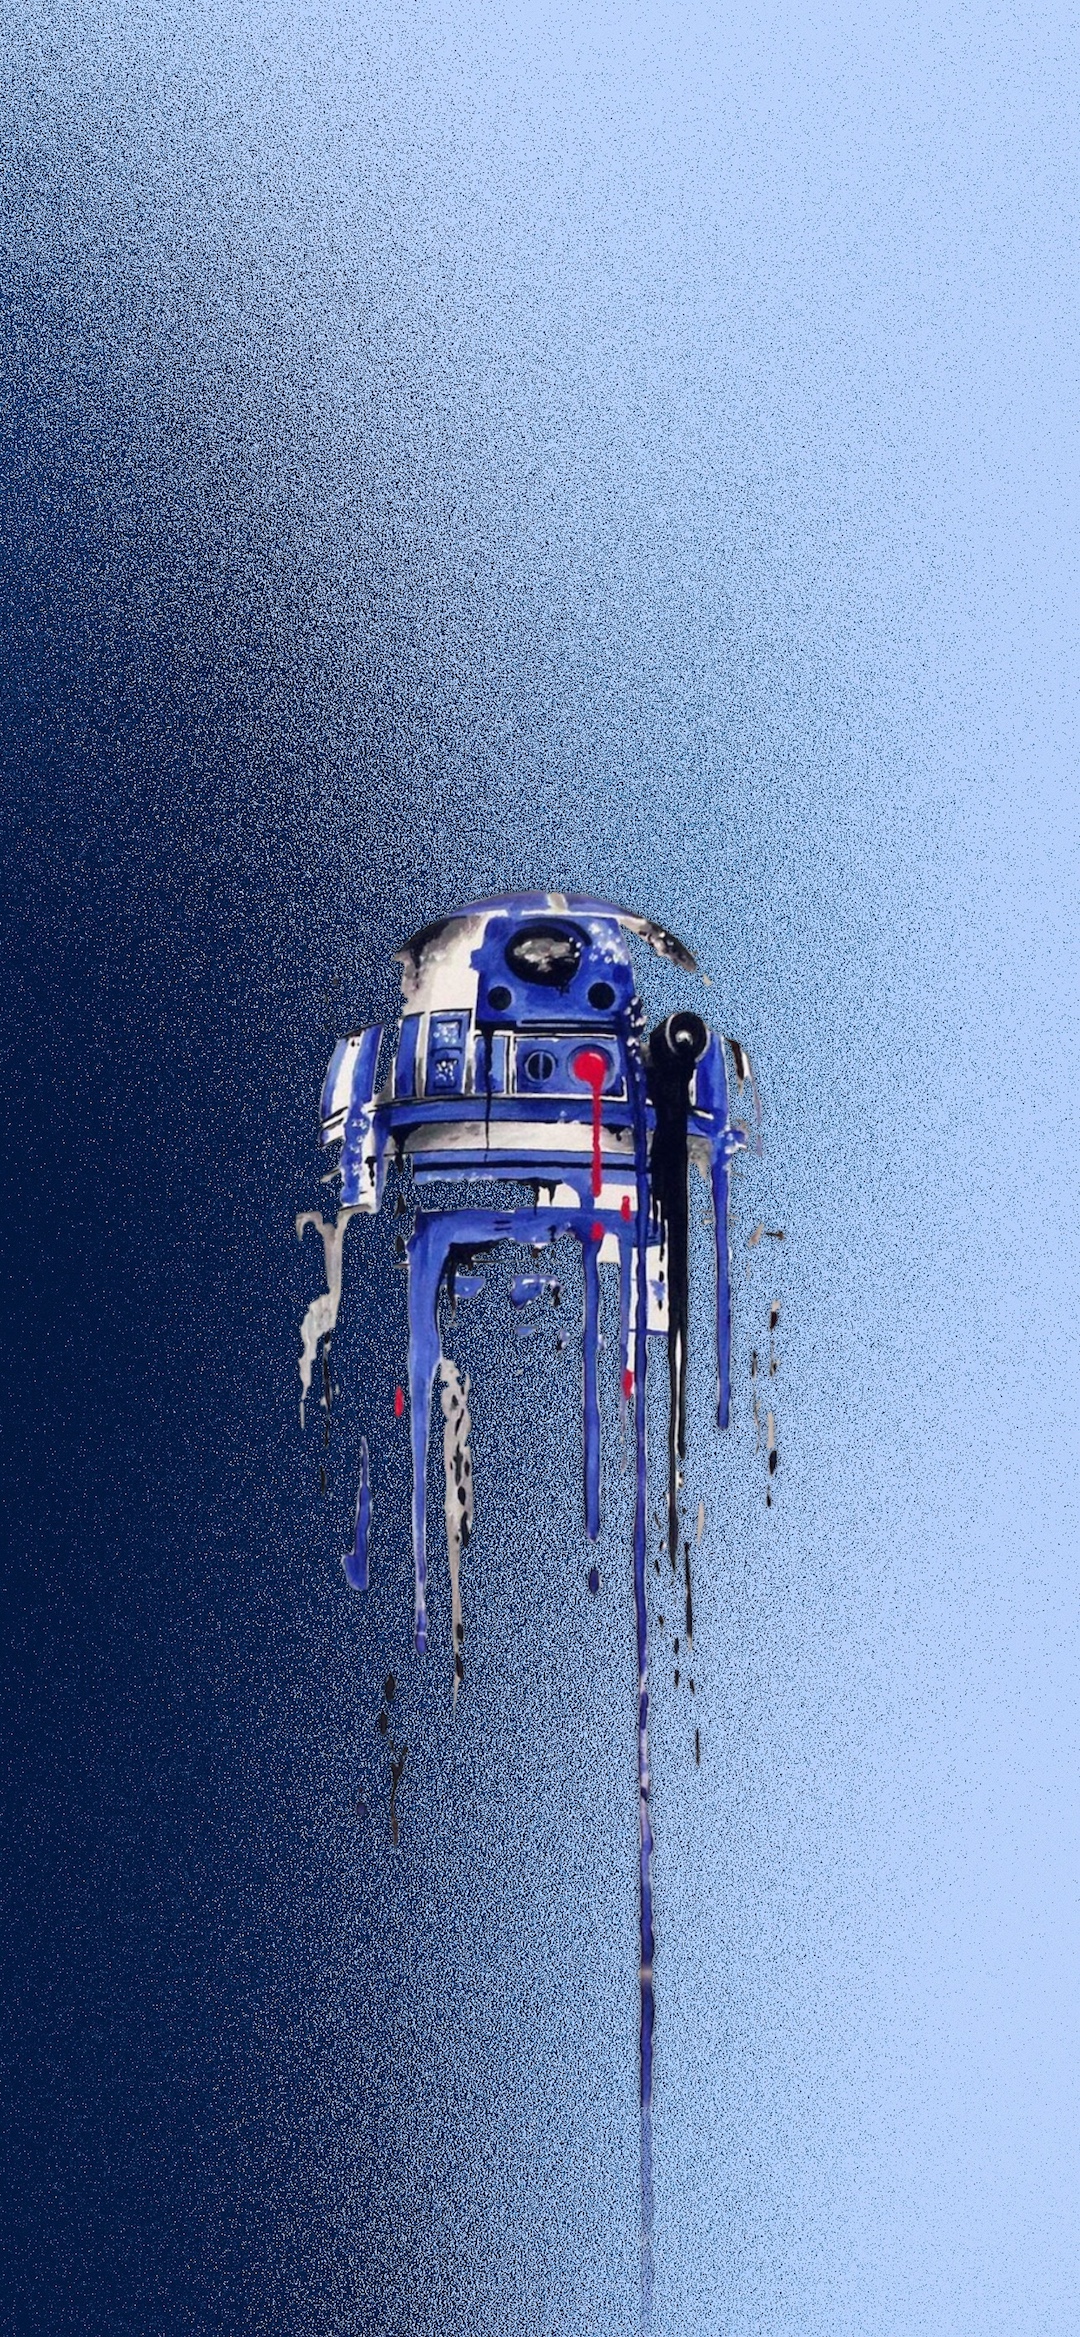 Wallpaper  artwork R2 D2 Star Wars science fiction simple background  white background 1920x1080  WallpaperManiac  1531569  HD Wallpapers   WallHere